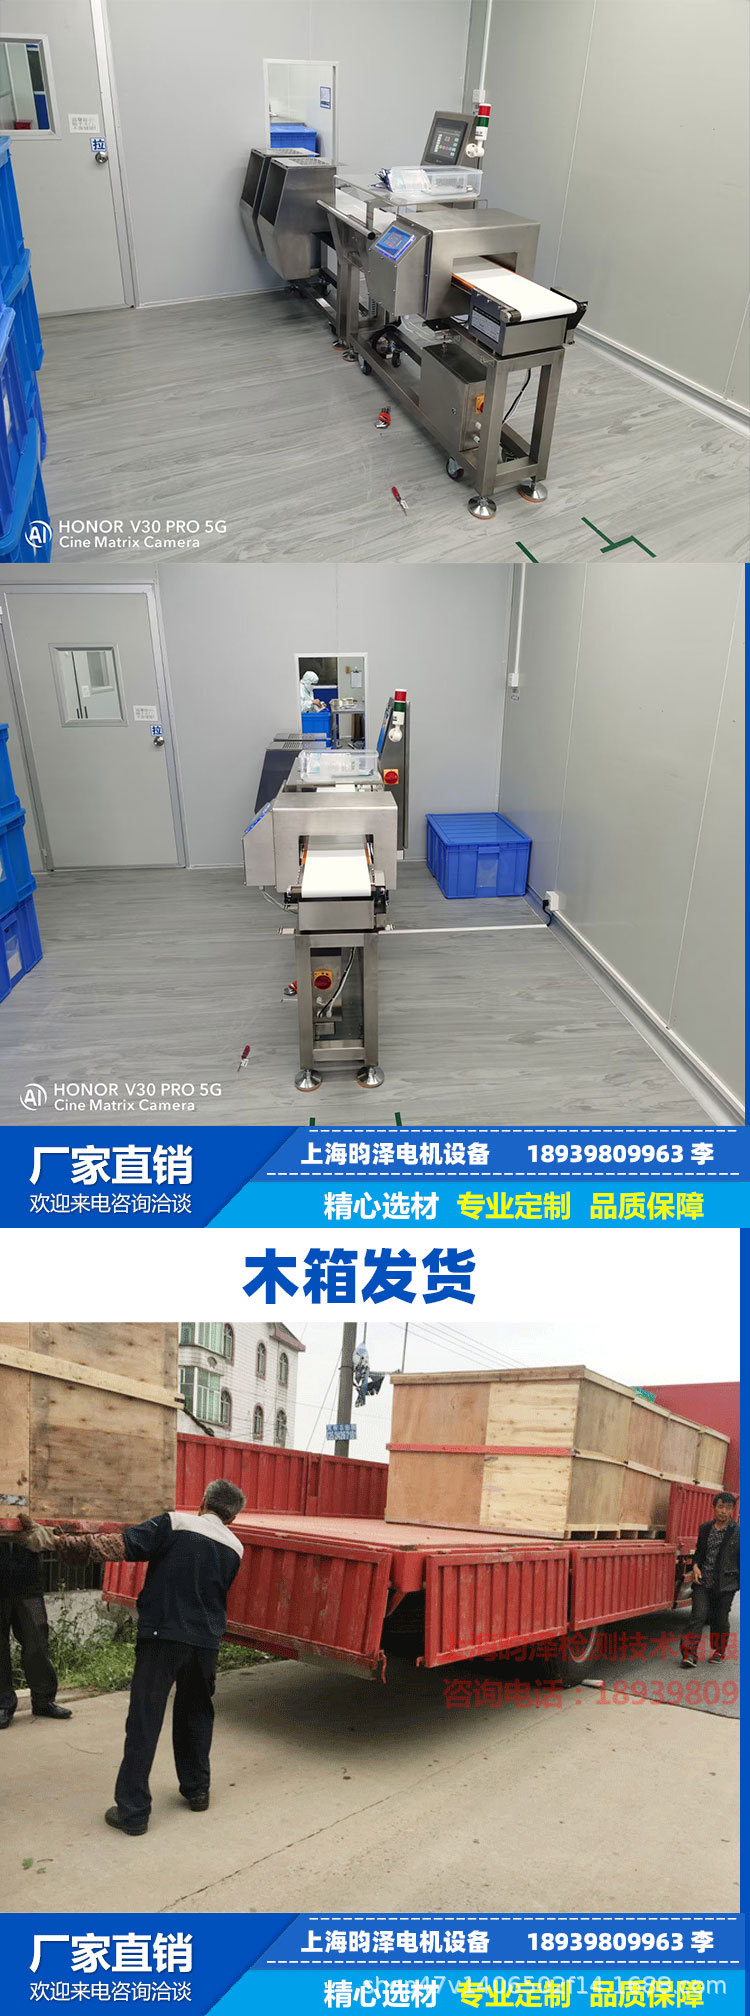 Fully automatic and high-precision online weighing machine, dynamic scale, industrial scale, conveyor electronic scale, weighing machine